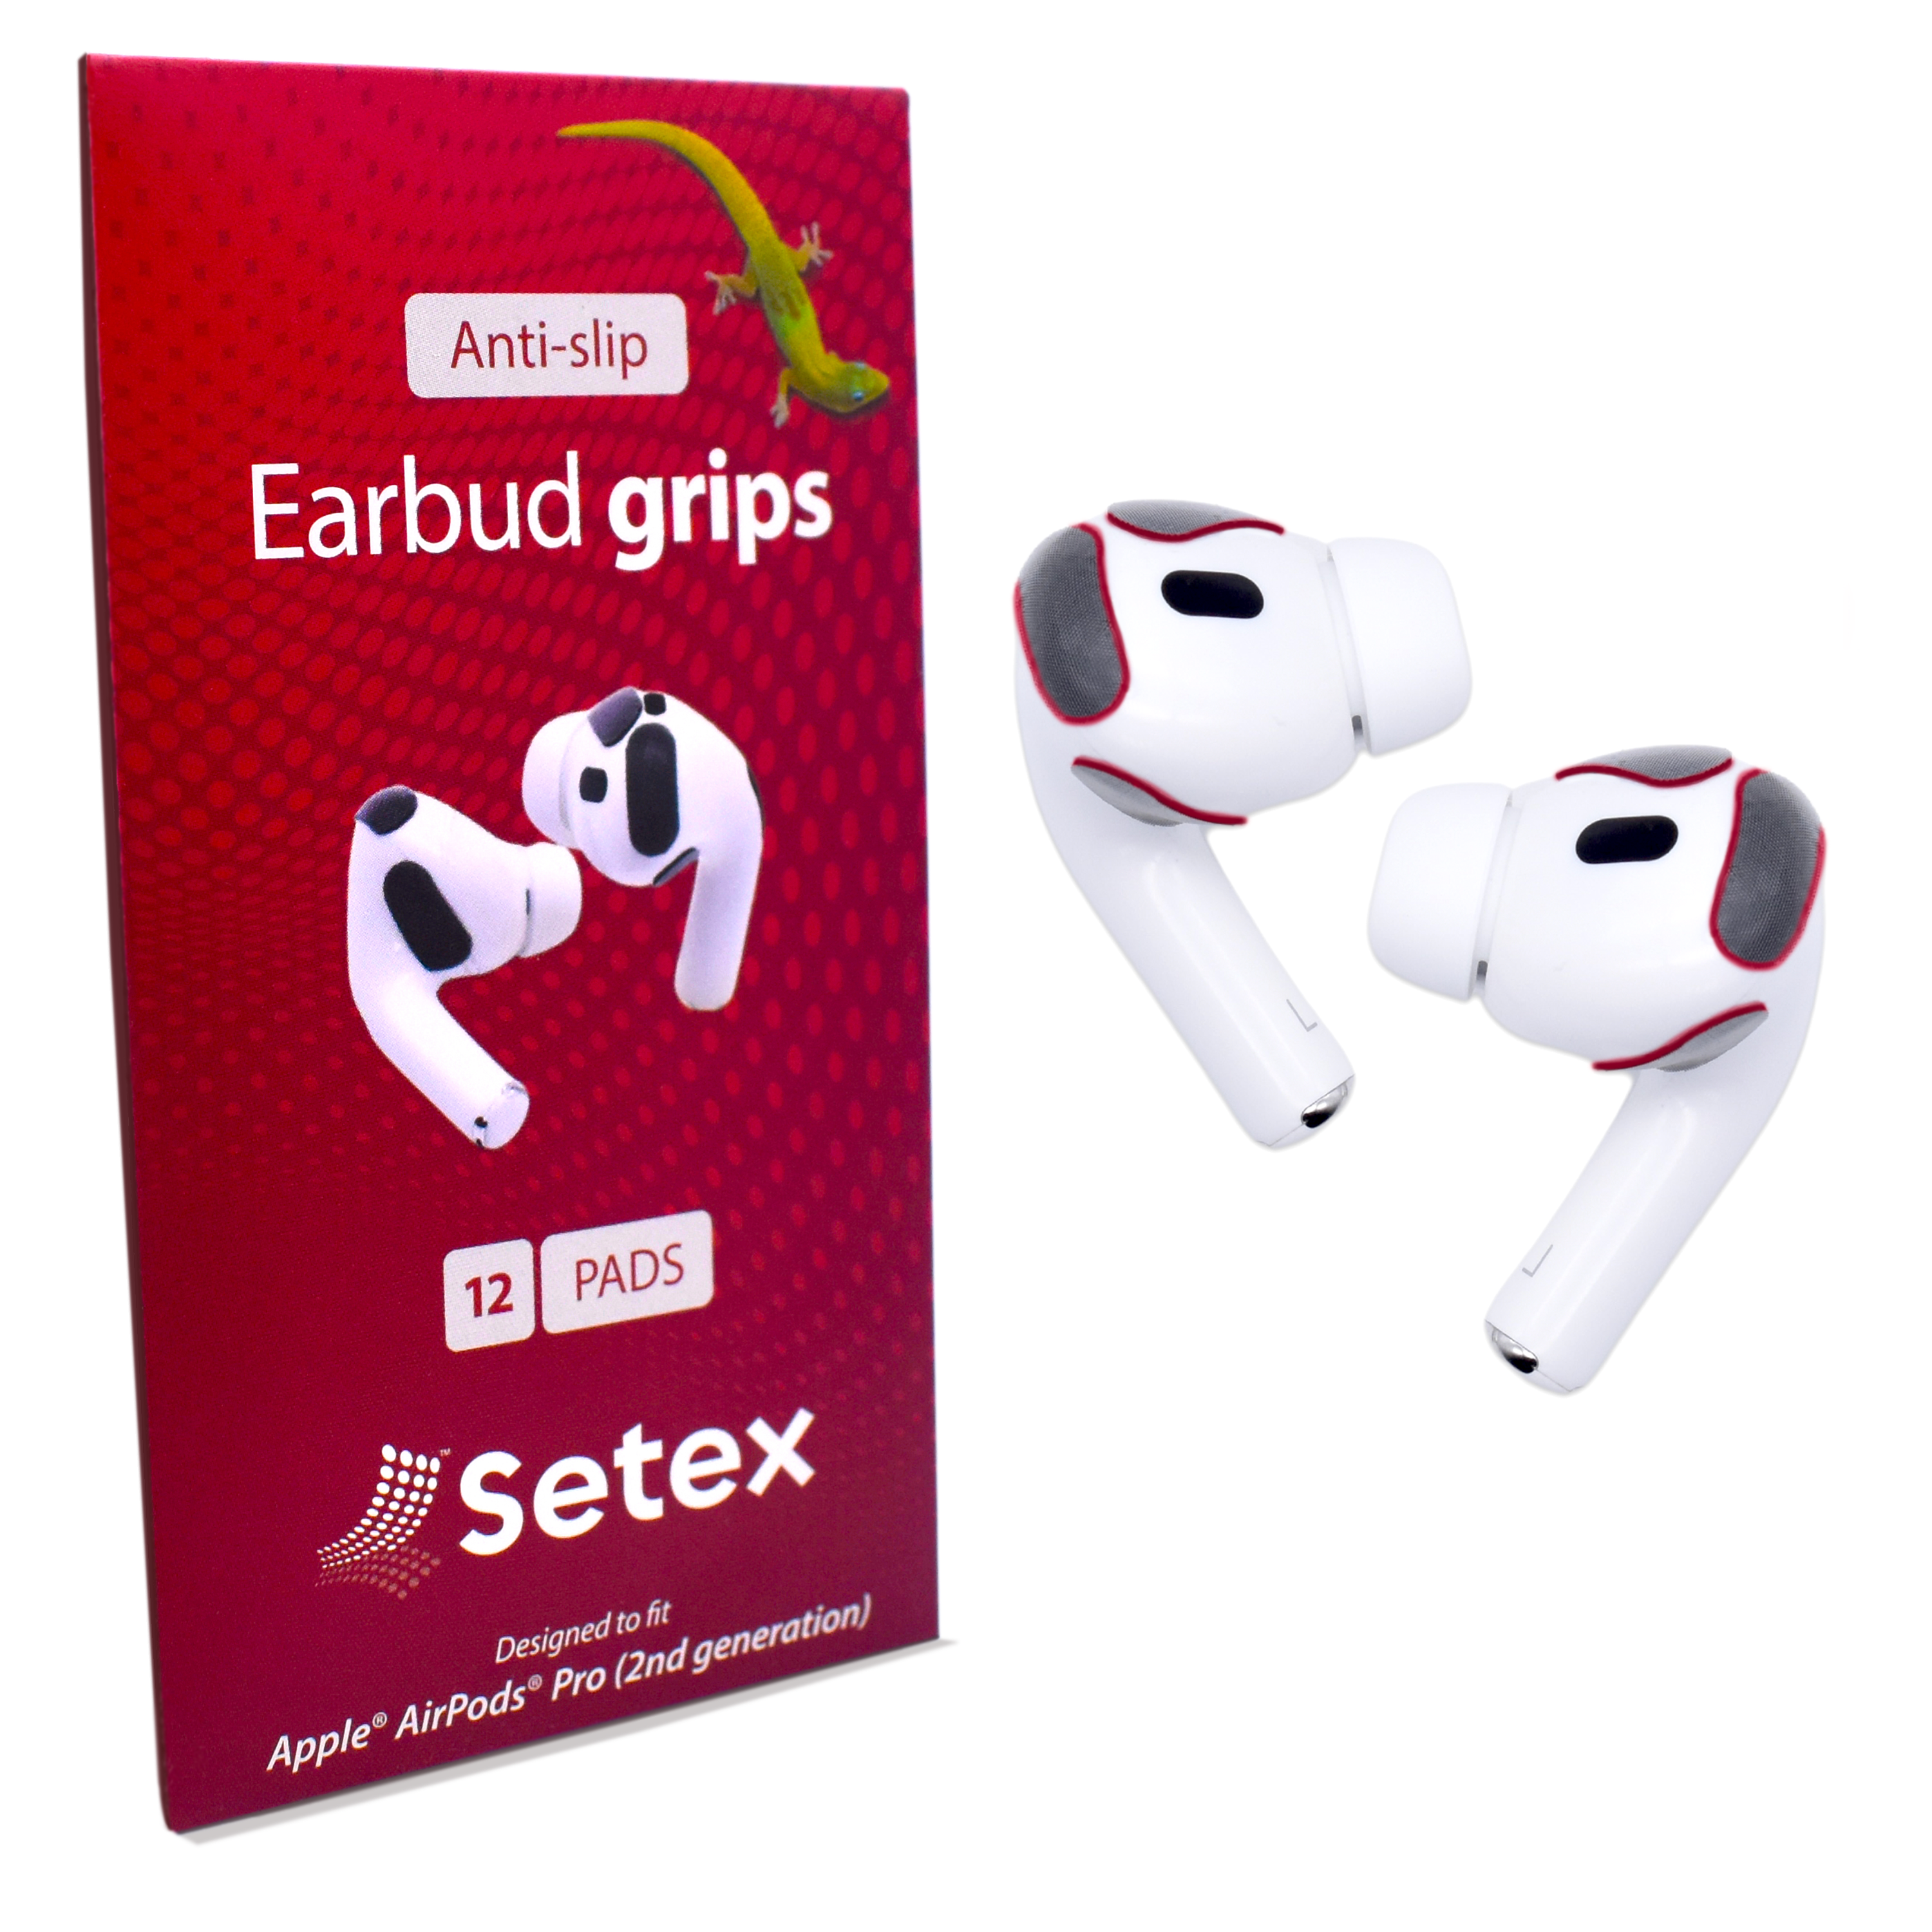 Setex® Earbud Grips - For Apple® AirPod® - AirPods Pro Gen 2